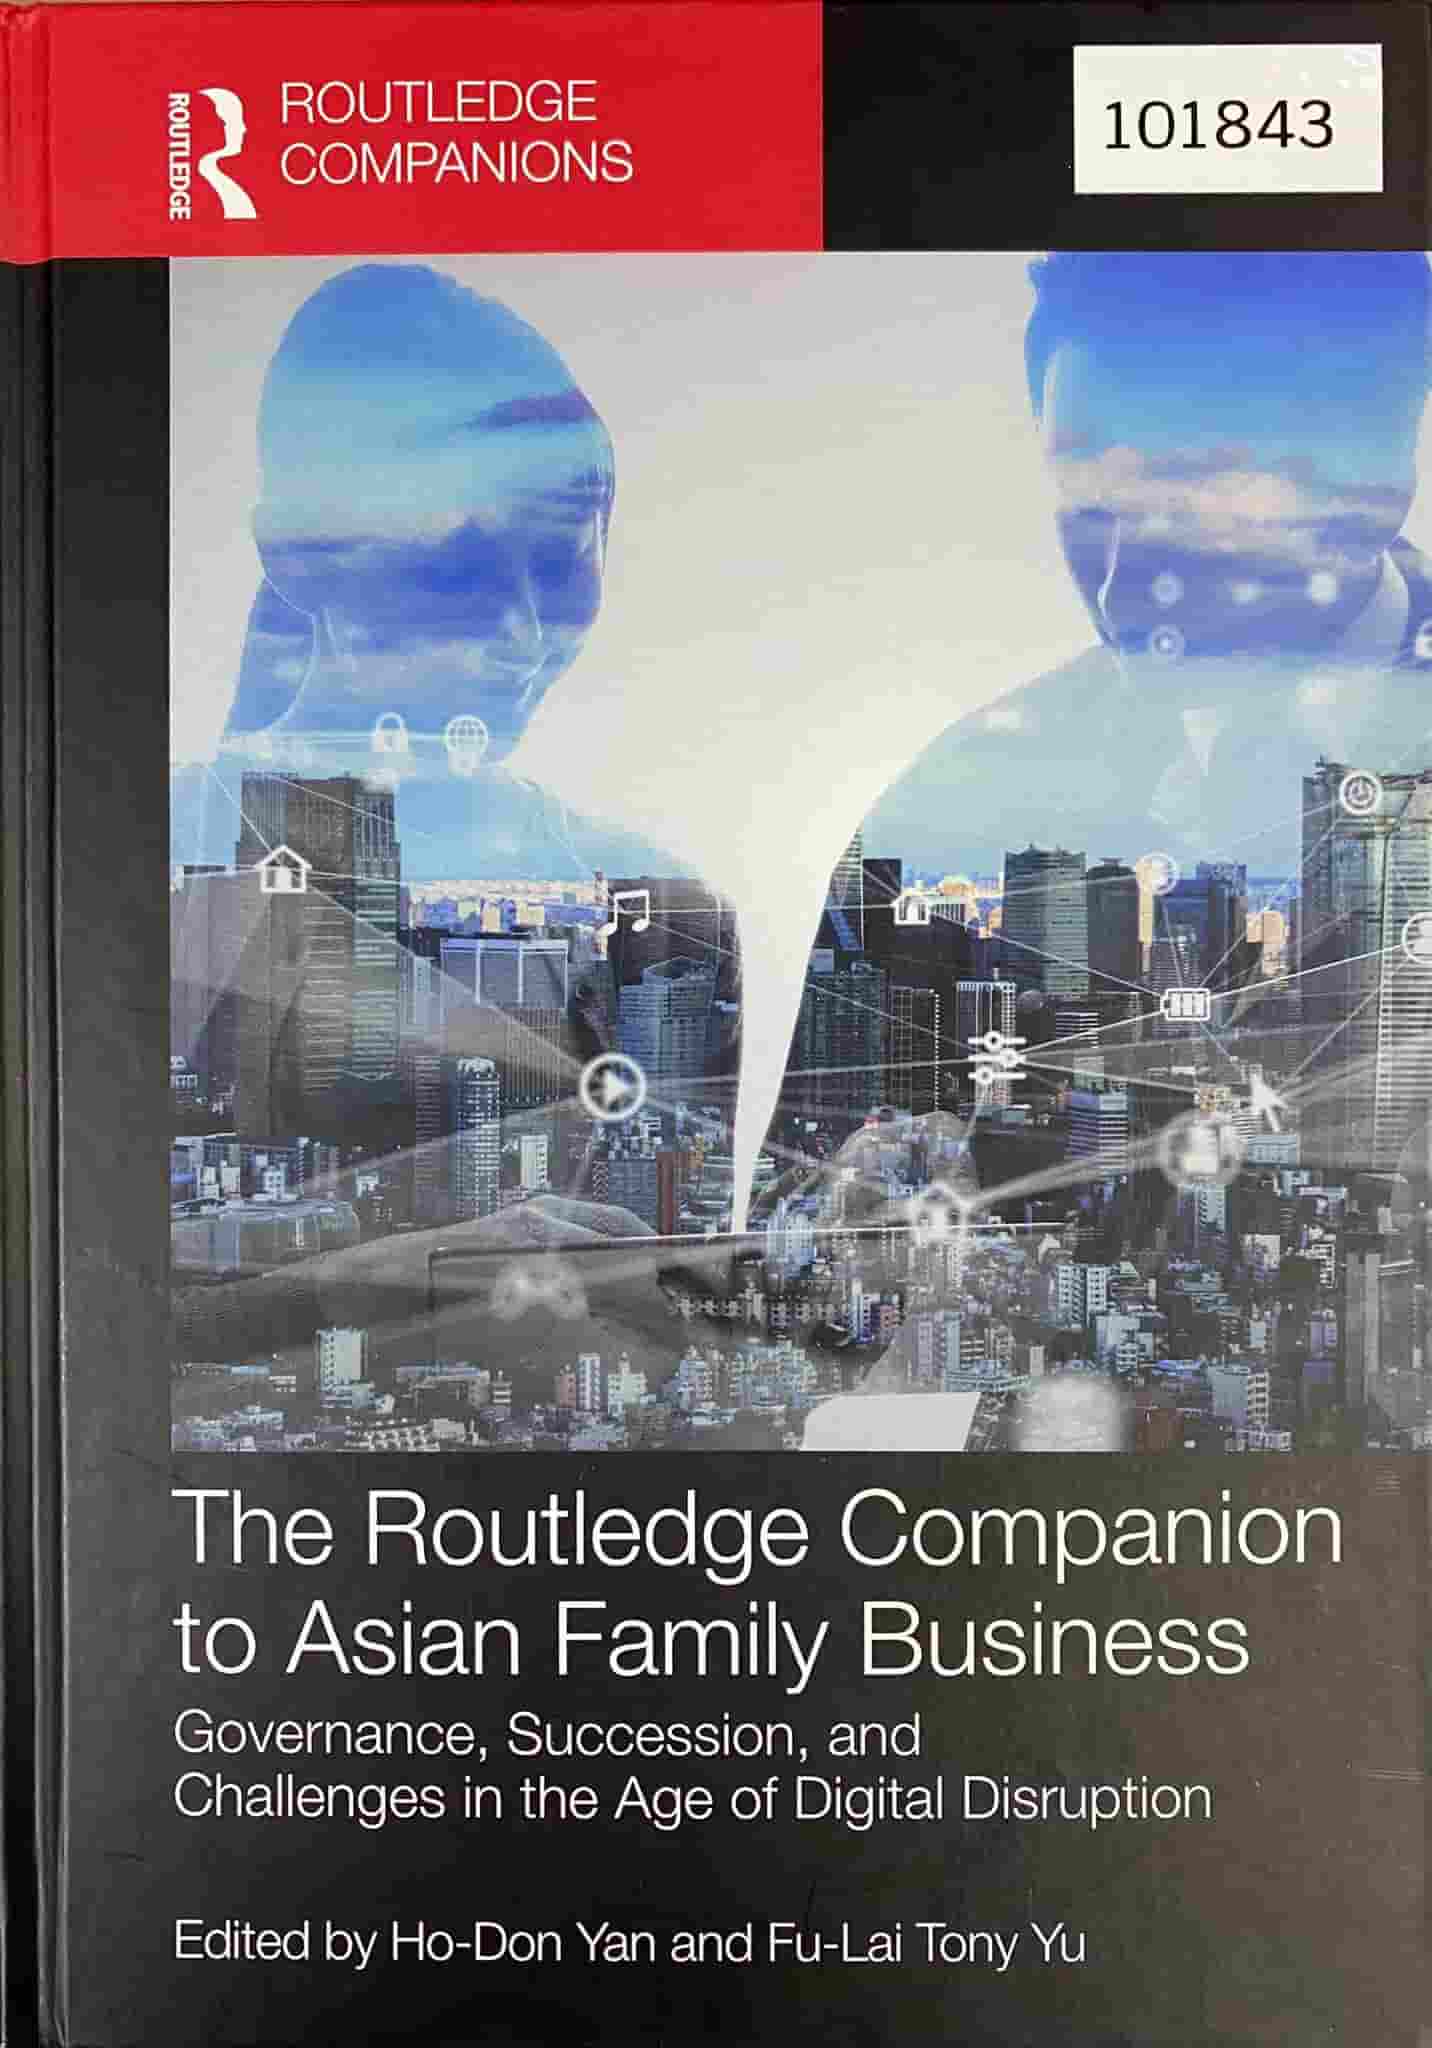 The Routledge companion to Asian family business: governance, succession, and challenges in the age of digital disruption